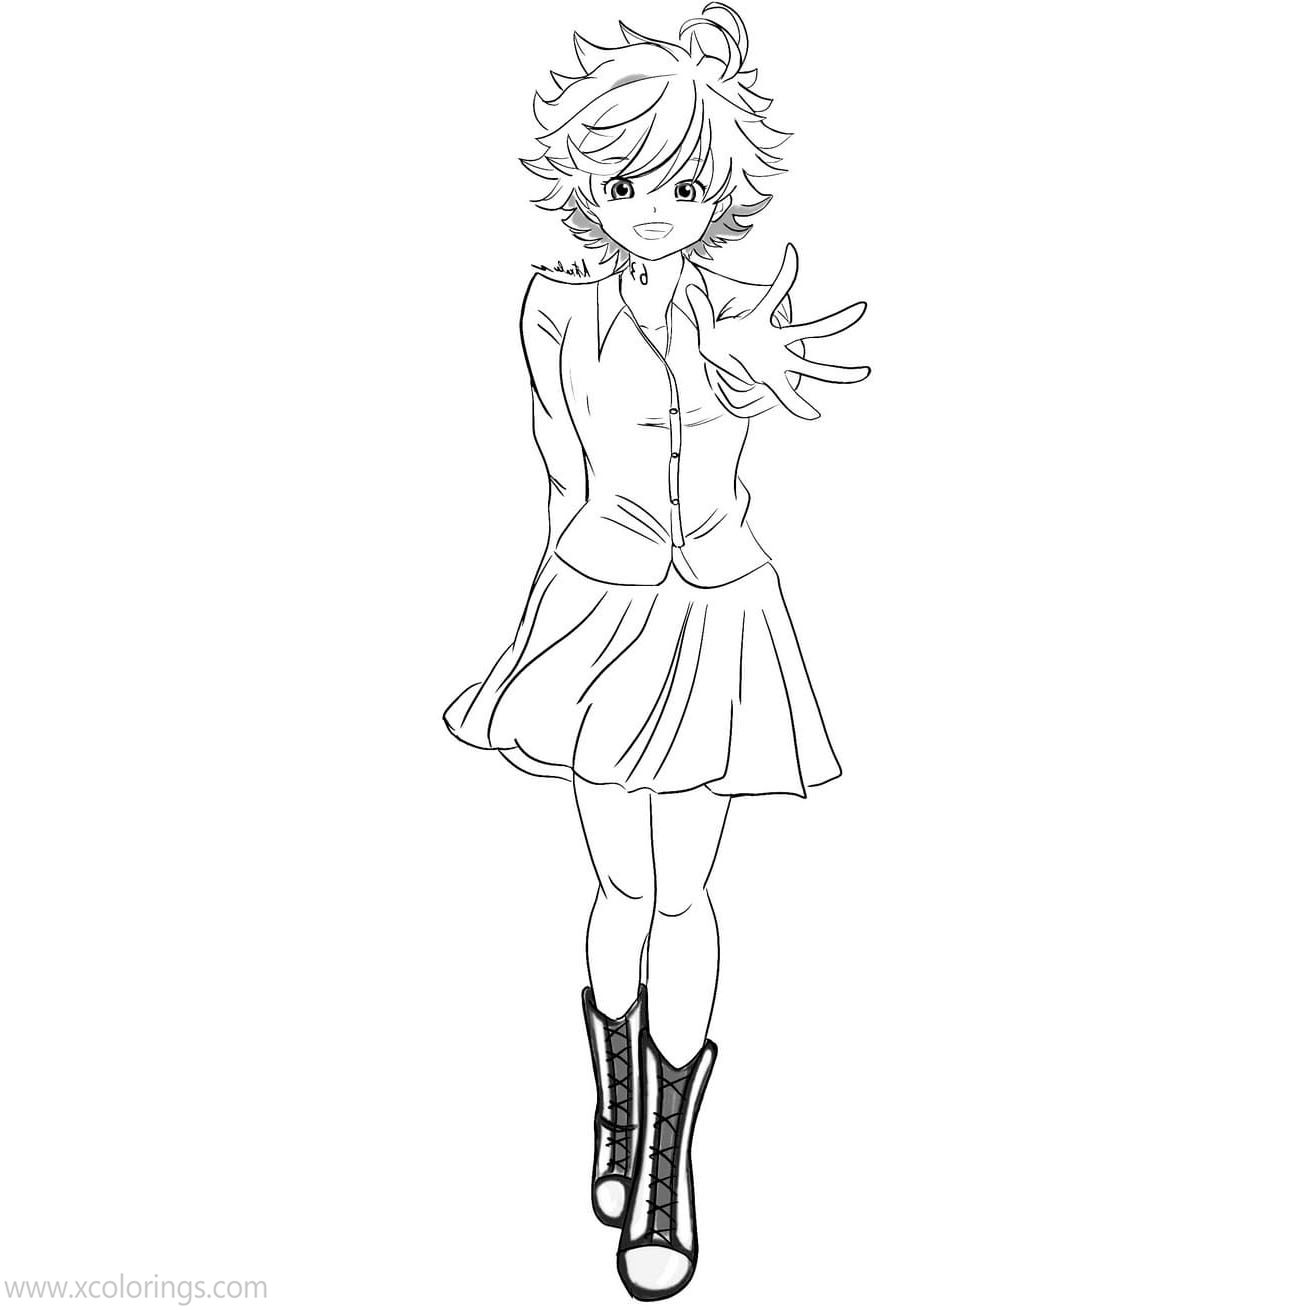 Free The Promised Neverland Coloring Pages Emma the Girl printable